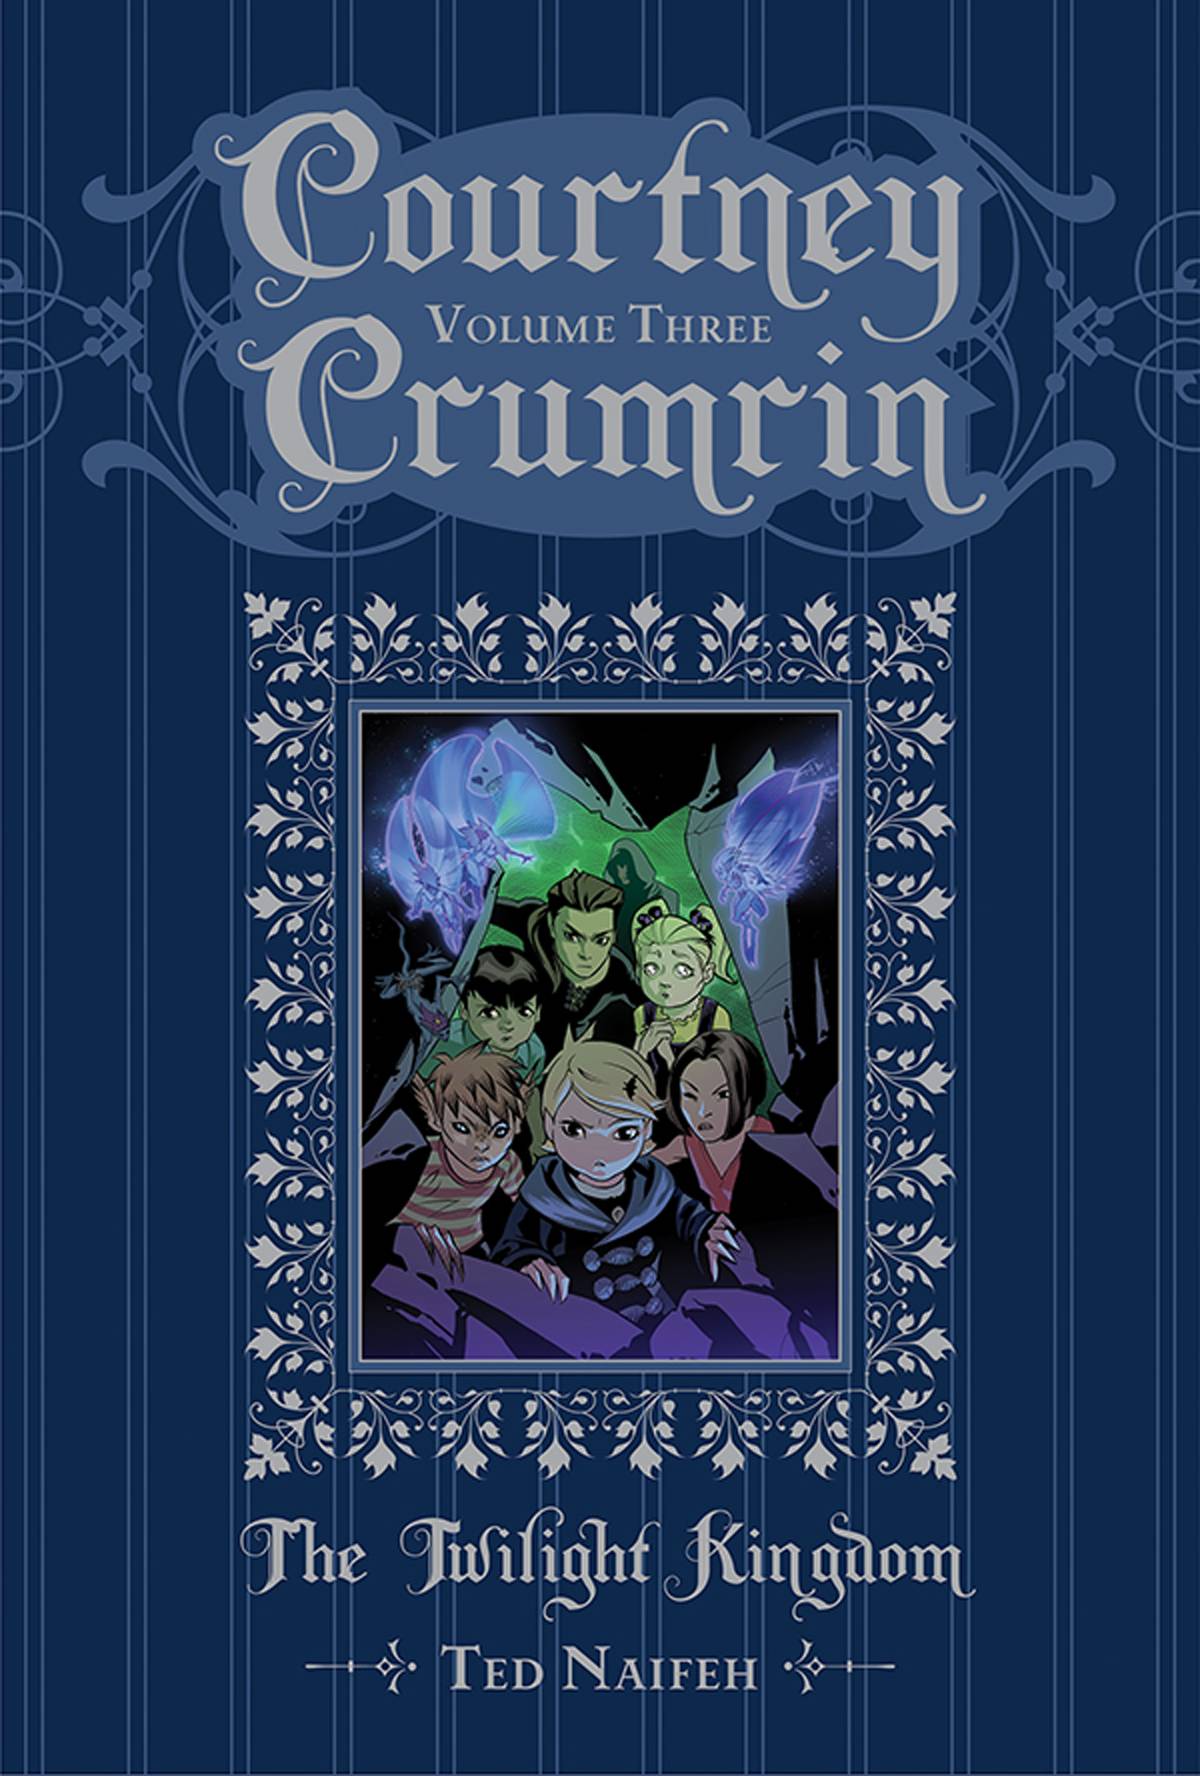 Courtney Crumrin Special Edition Hardcover Volume 3